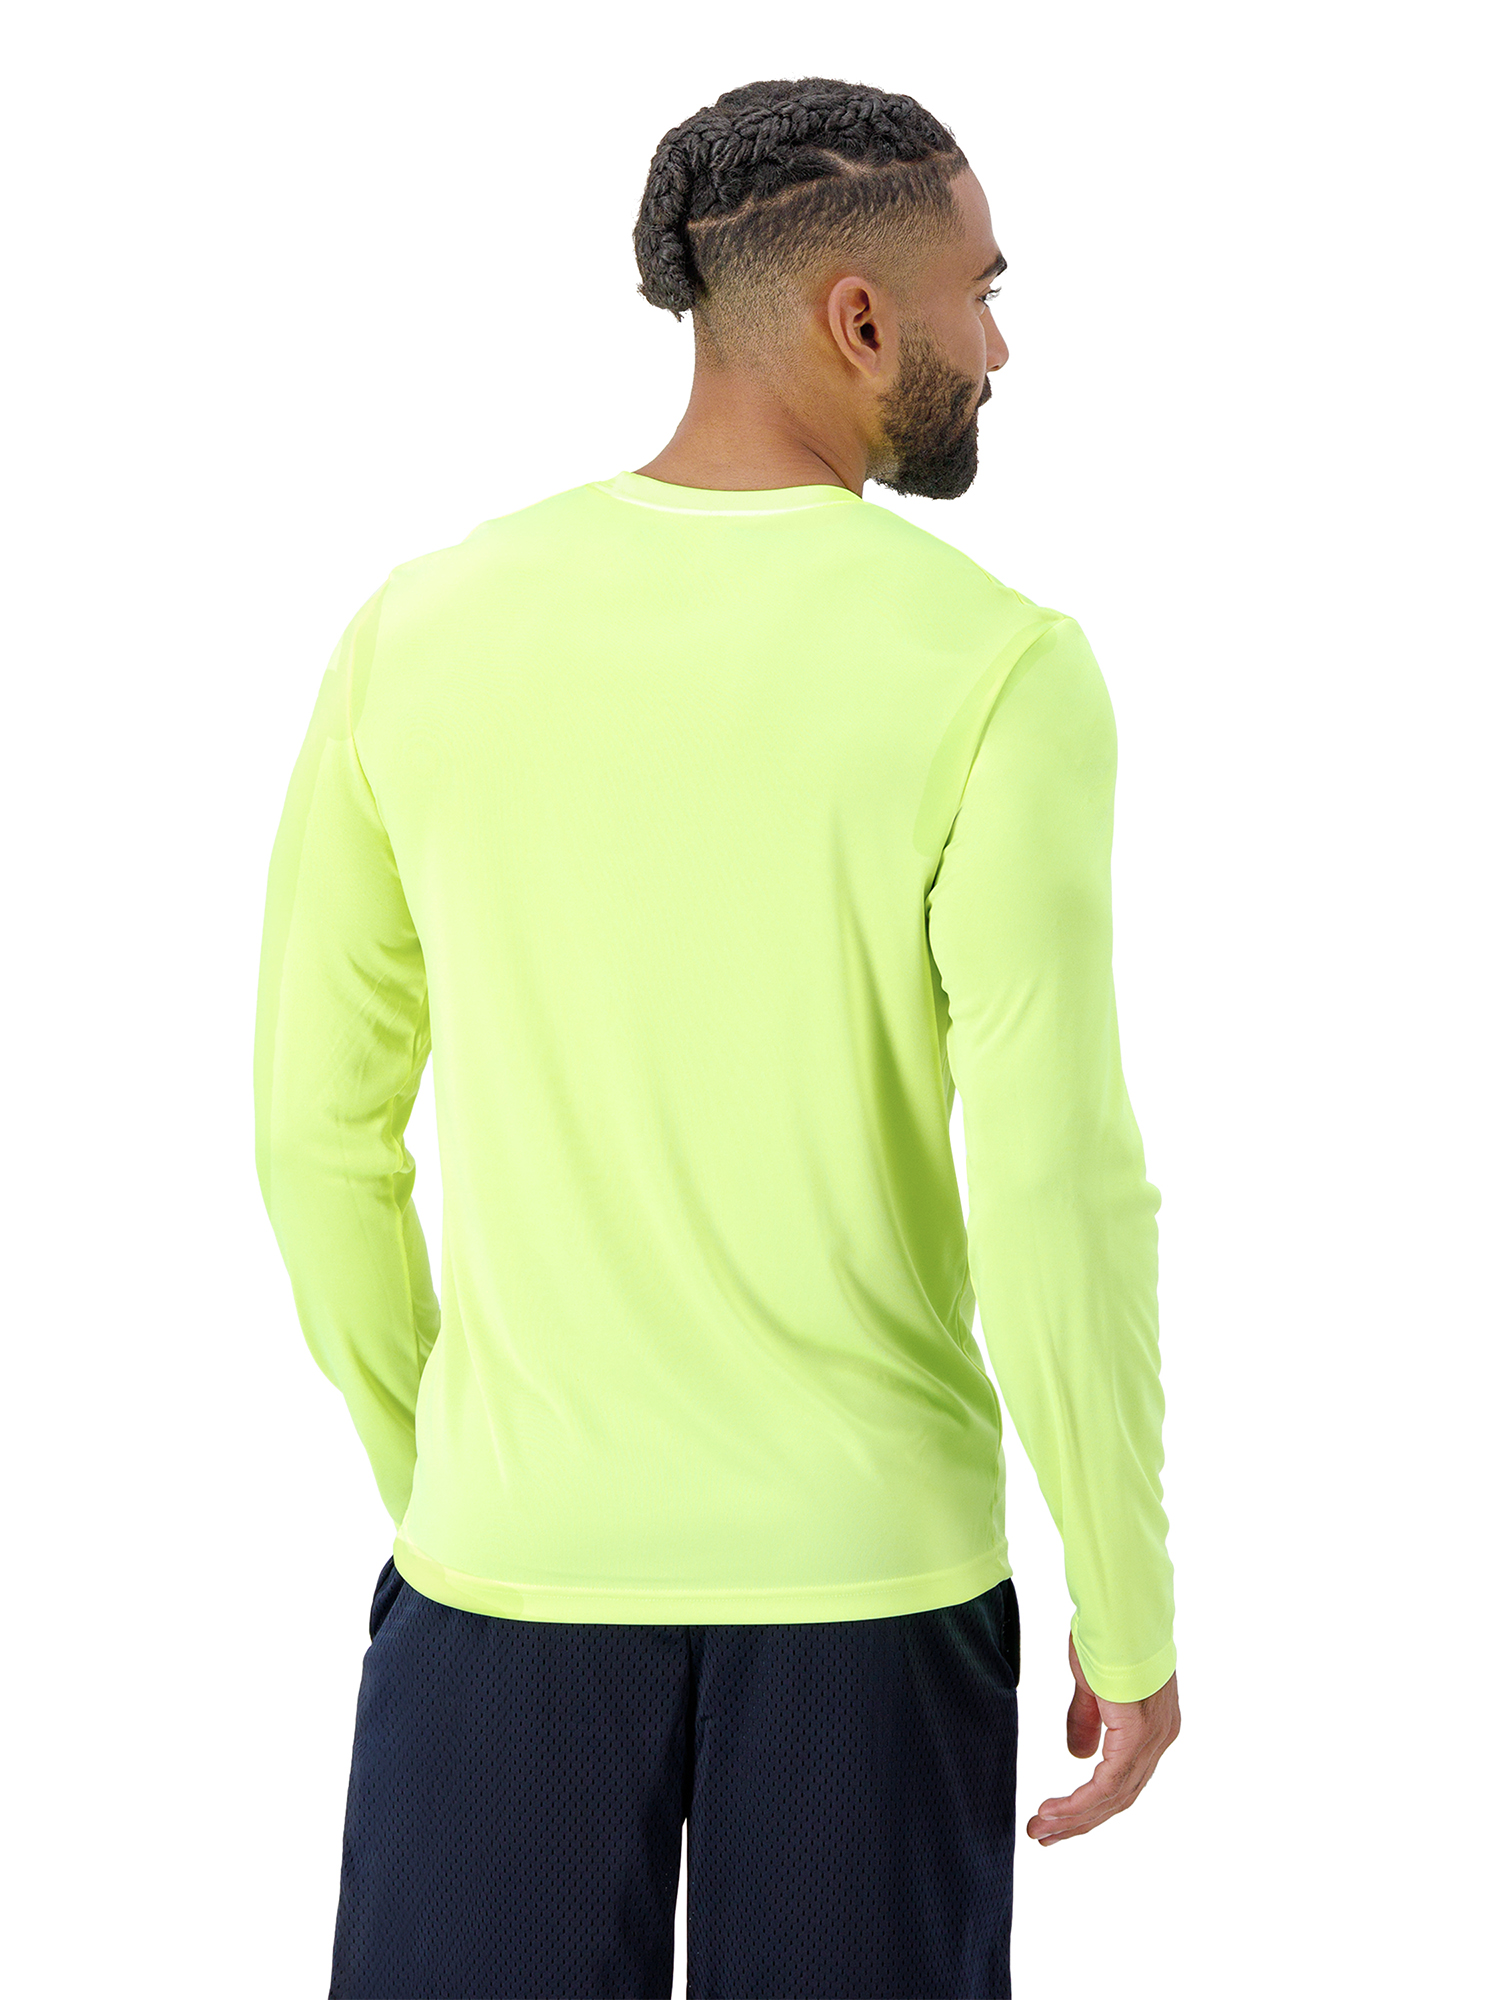 Hanes Men's and Big Men's Cool Dri Performance Long Sleeve T-Shirt (40+ UPF), Up to Size 3XL - image 3 of 8